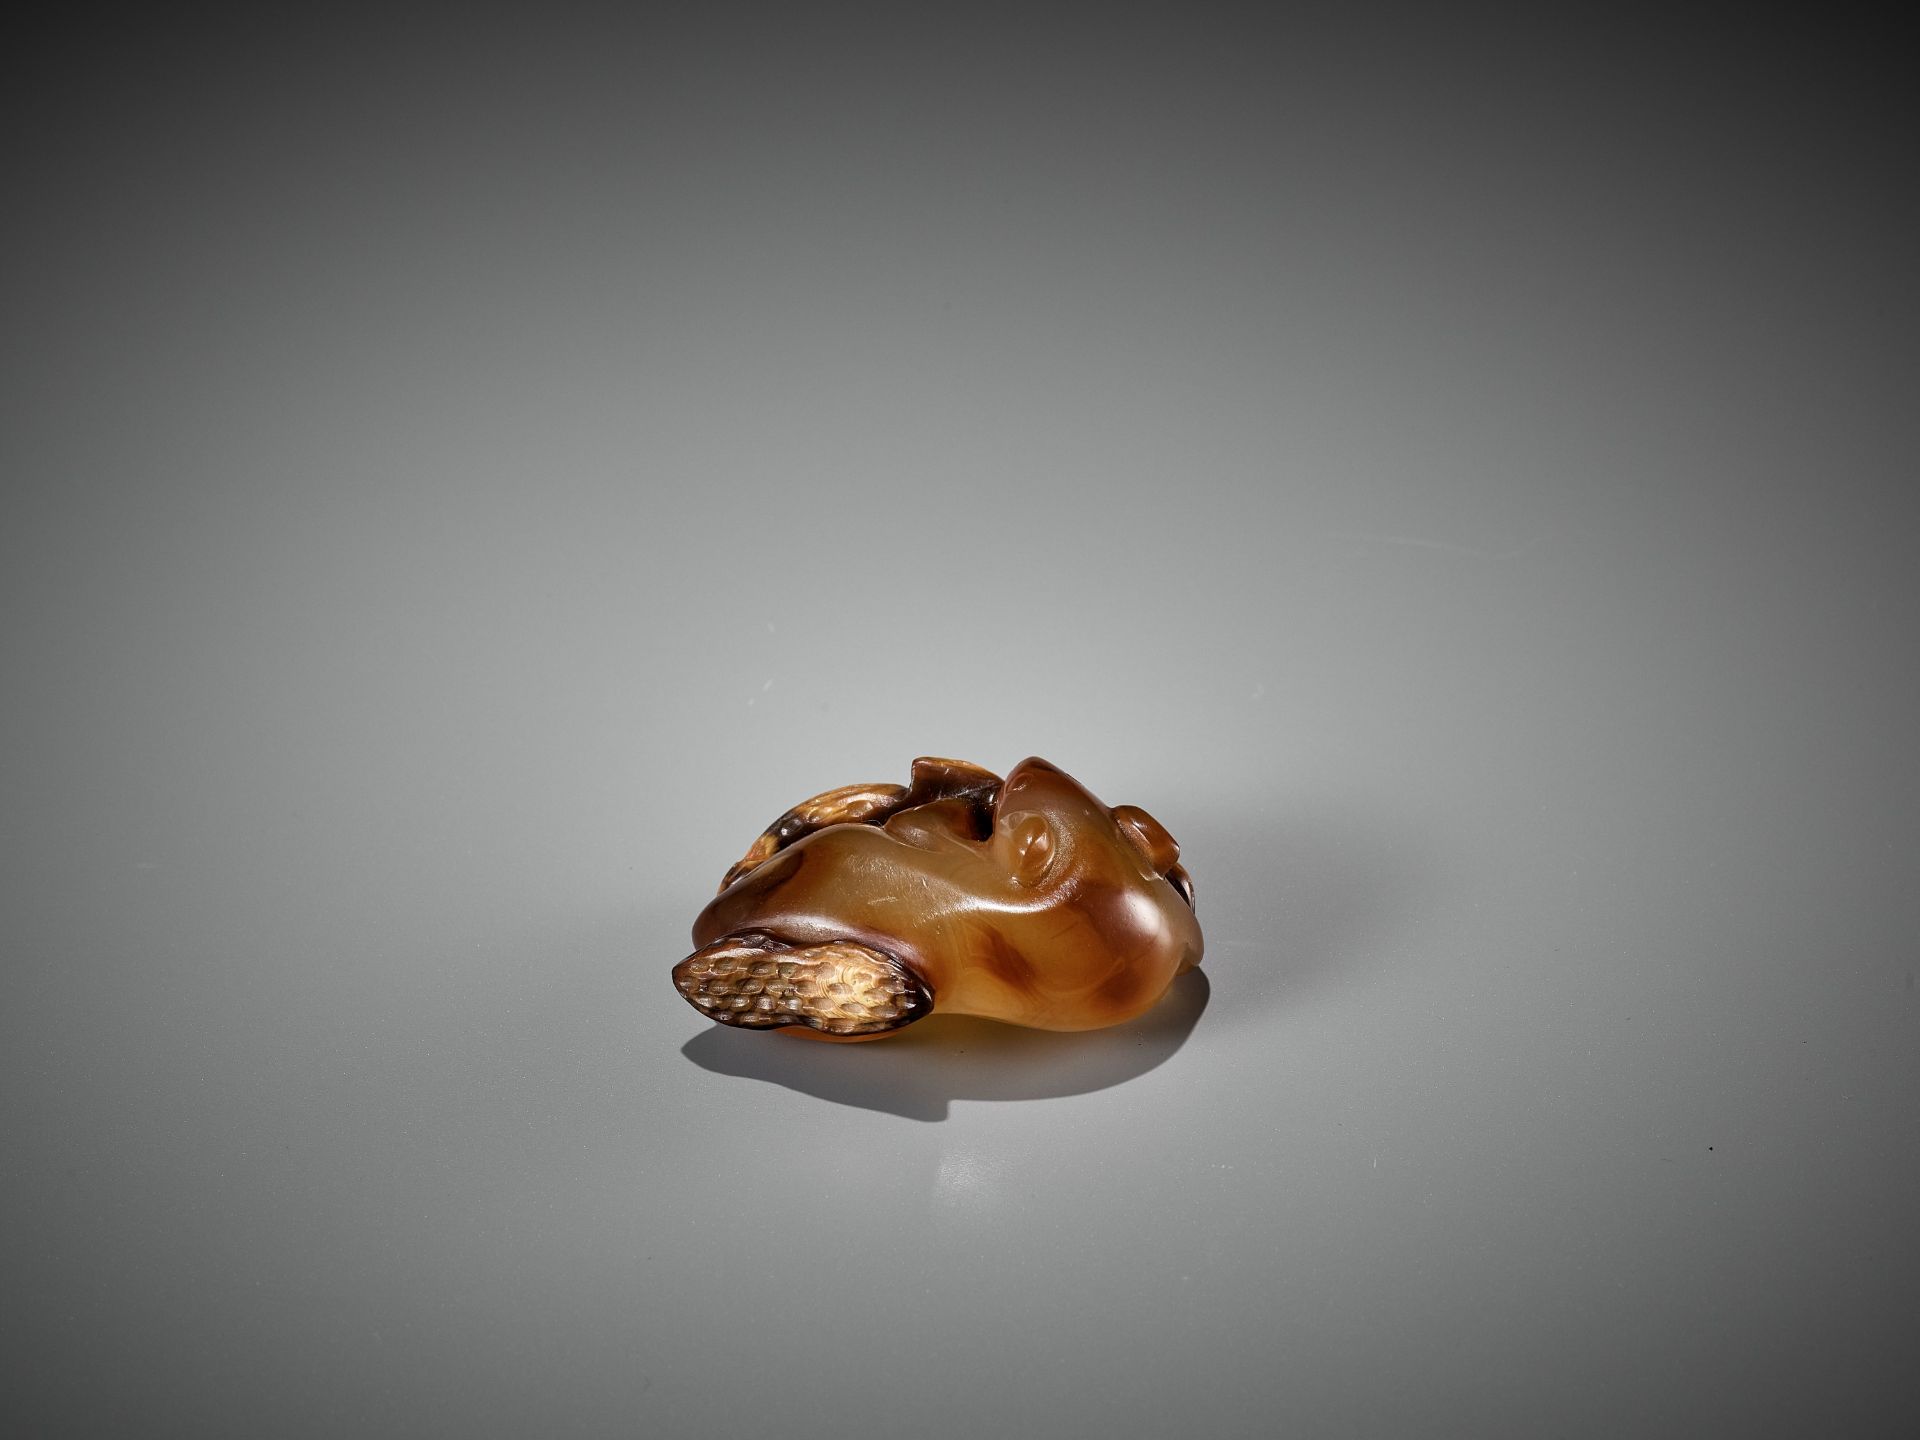 AN AGATE PENDANT OF A SQUIRREL WITH PEANUTS, 18TH-19TH CENTURY - Image 7 of 14